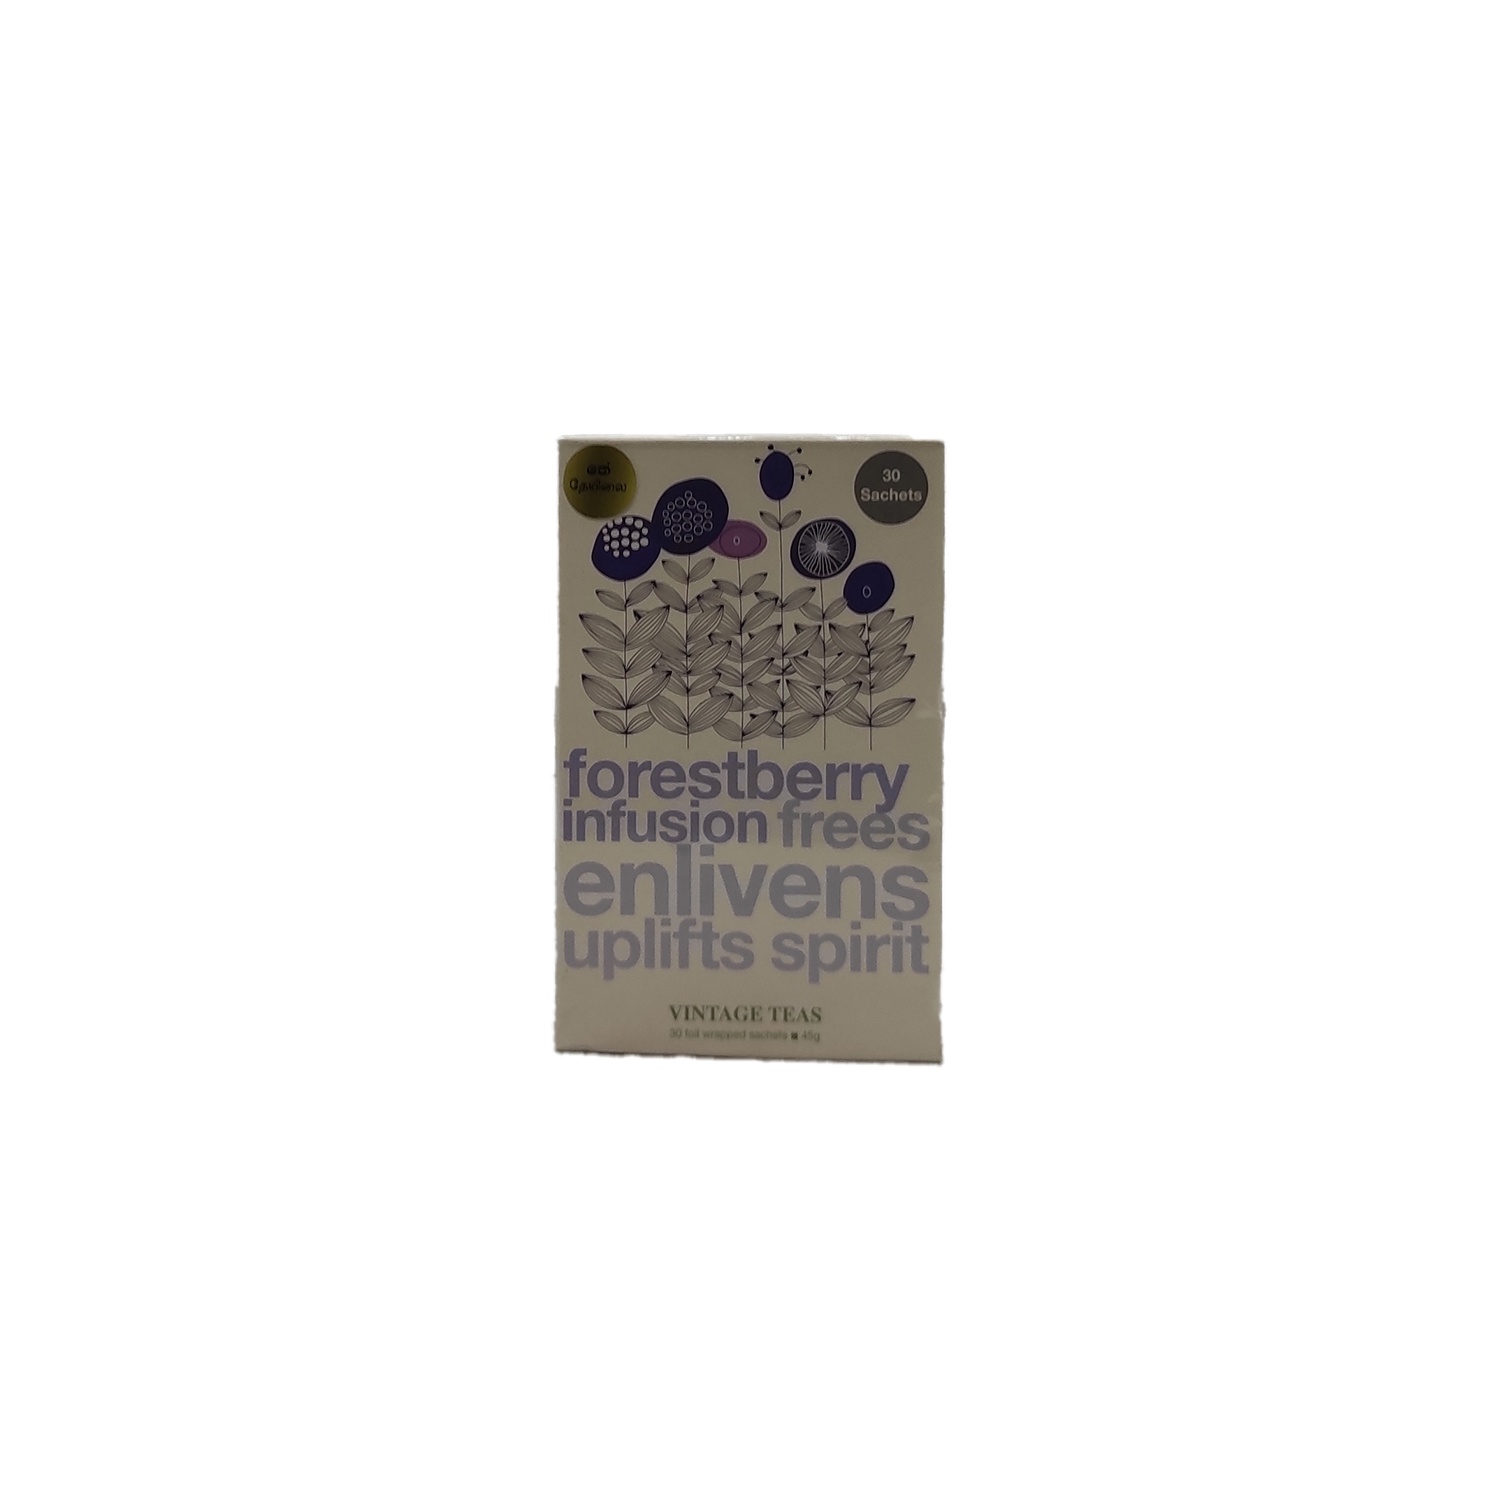 Vintage Forestberry Infusion Frees Enlivens Uplifts Spirit Tea 30S 45G ...